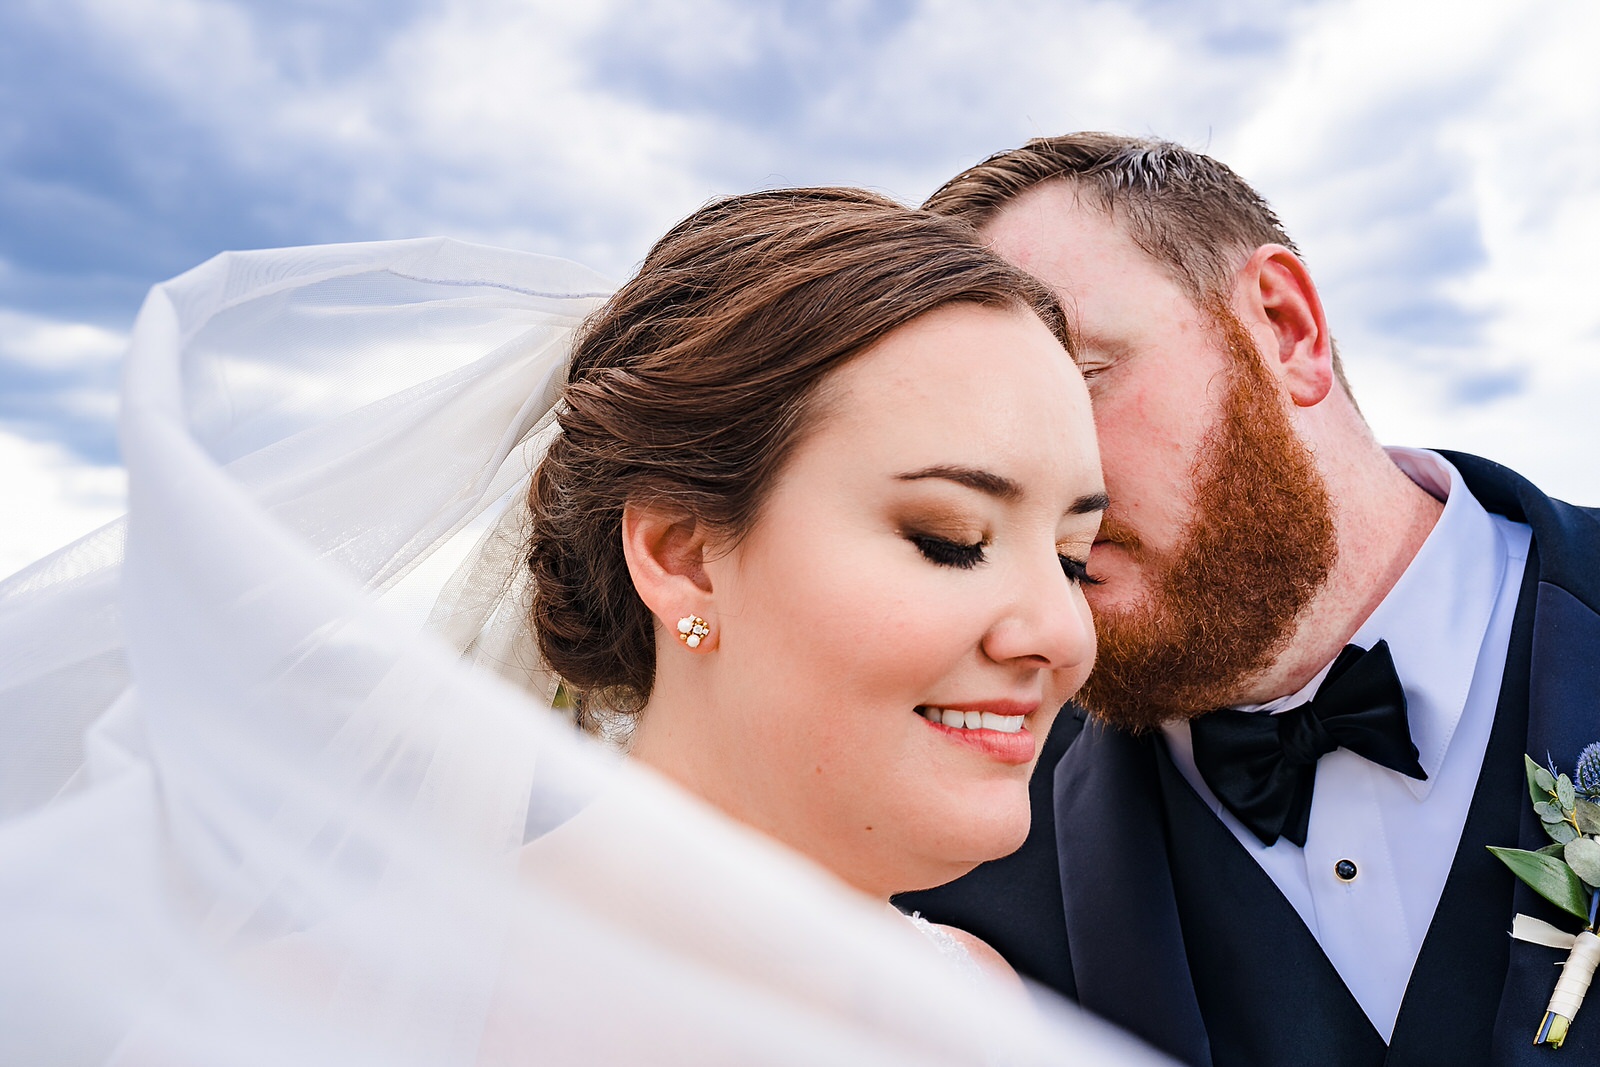 Portrait of a bride and groom on their wedding day at the Brooklyn Arts Center in Wilmington, NC